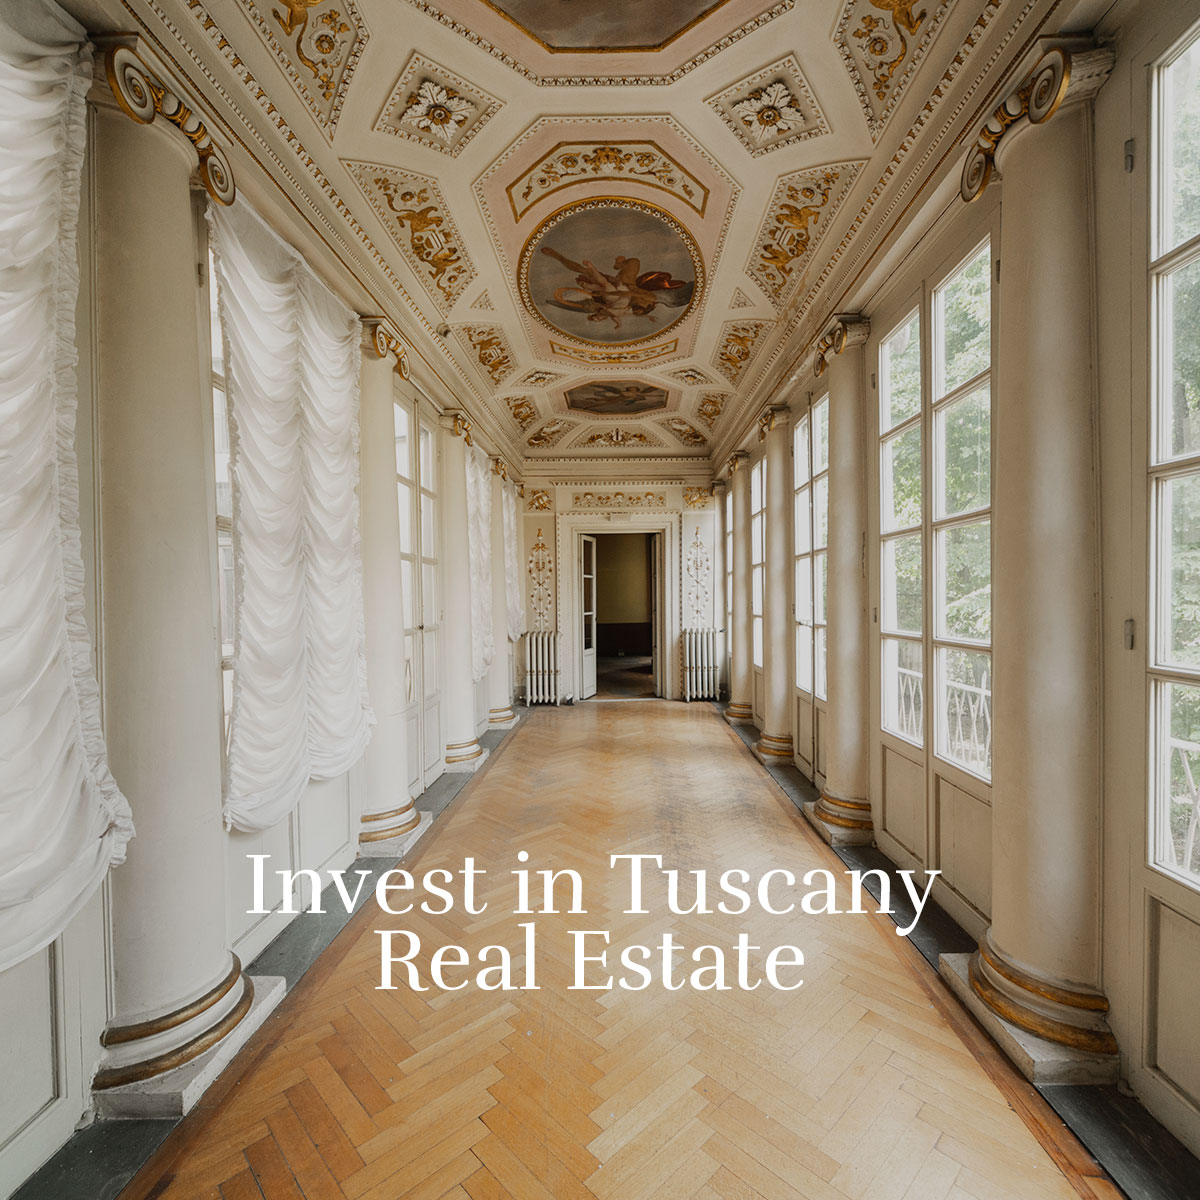 Invest in Tuscany – Real Estate